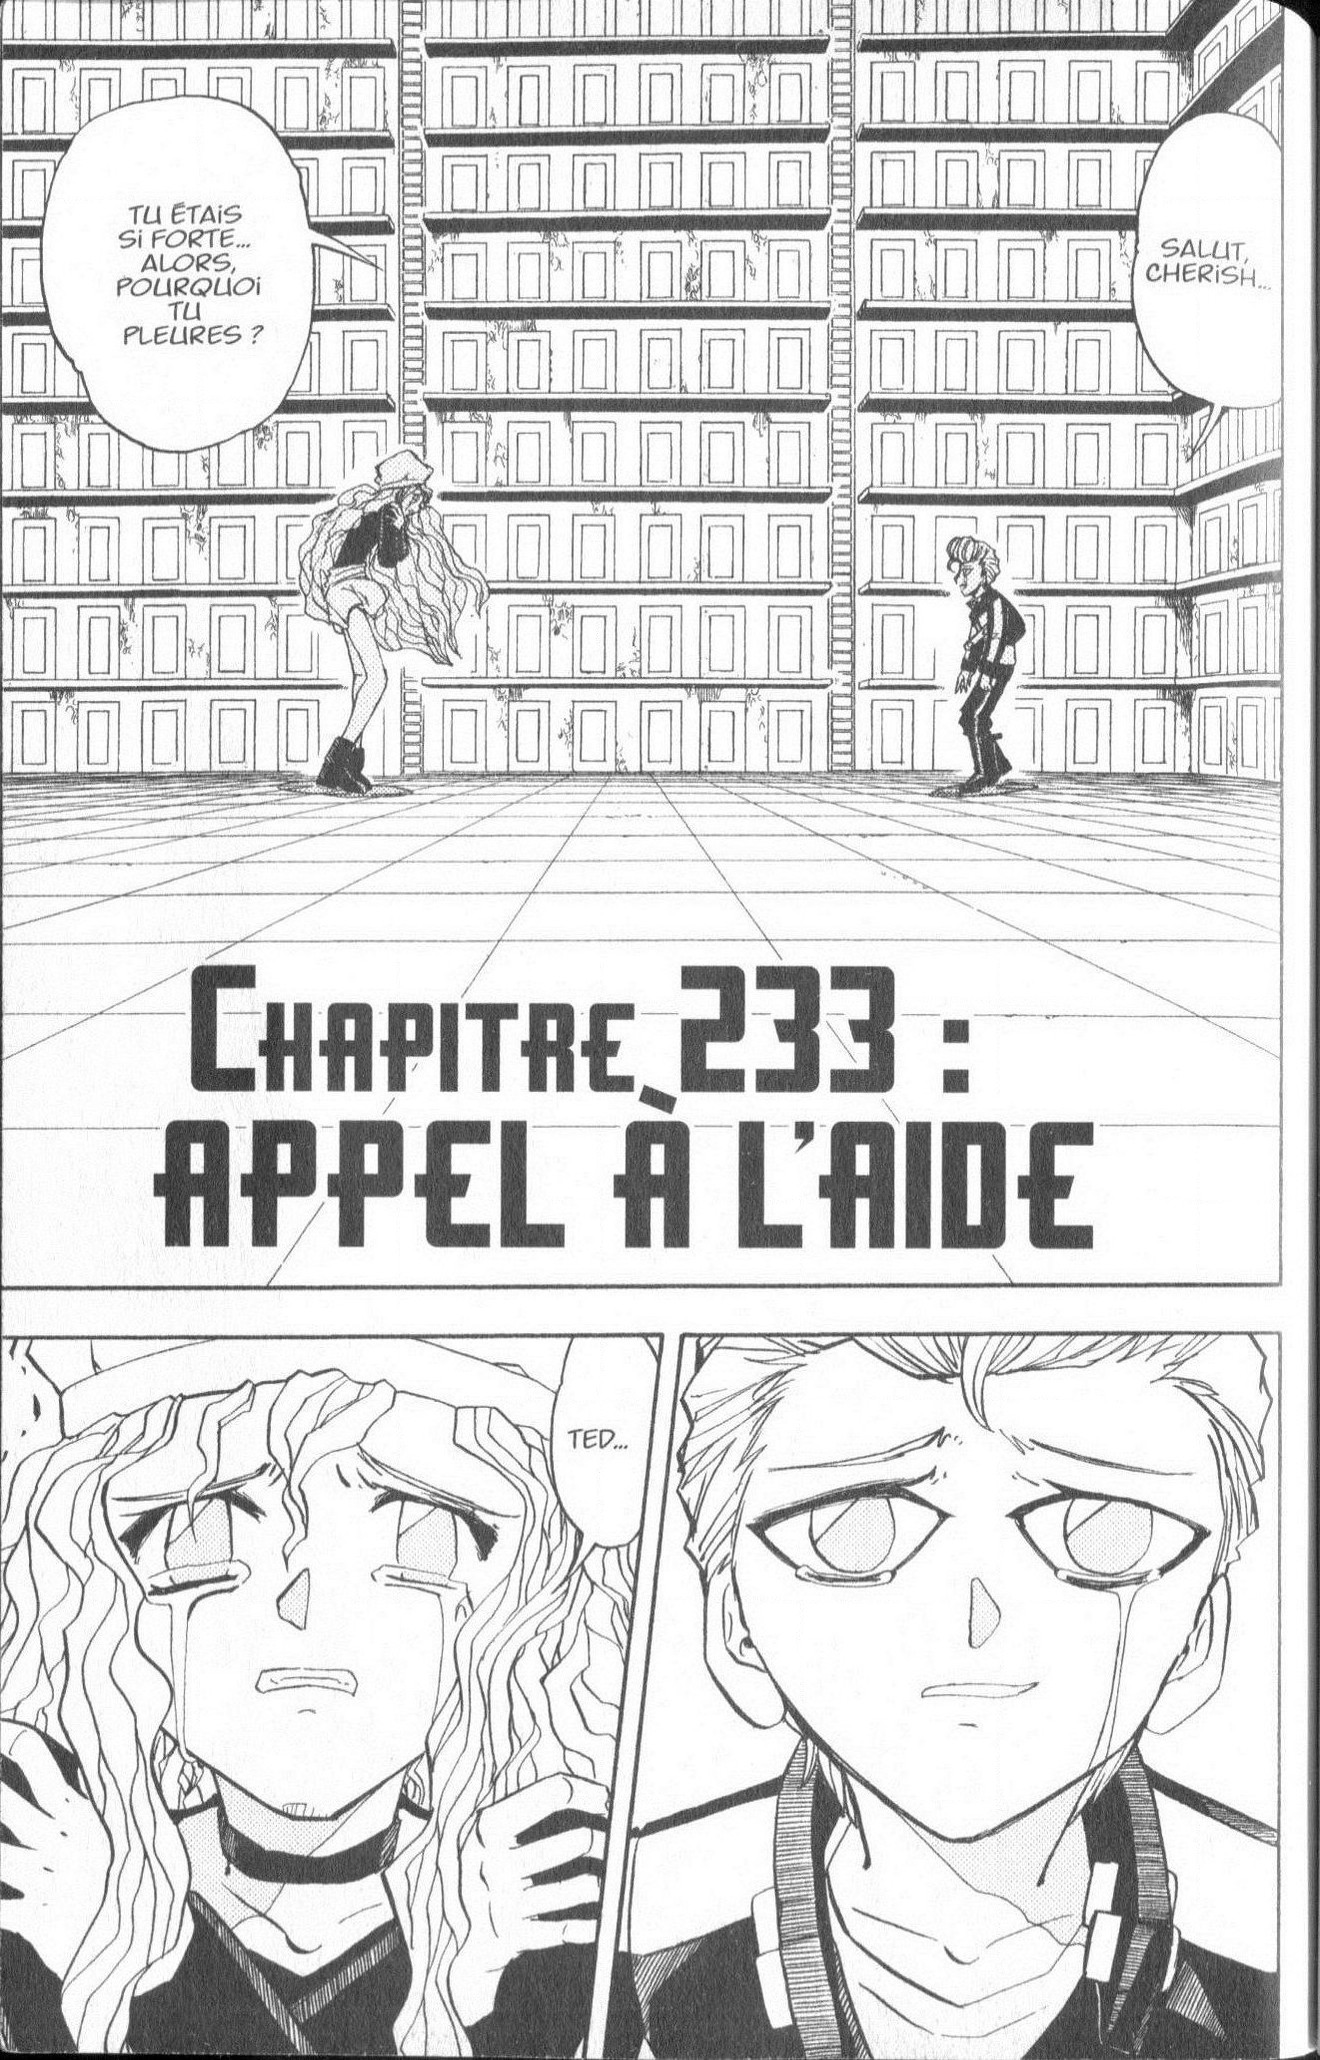 Zatch Bell: Chapter 233 - Page 1